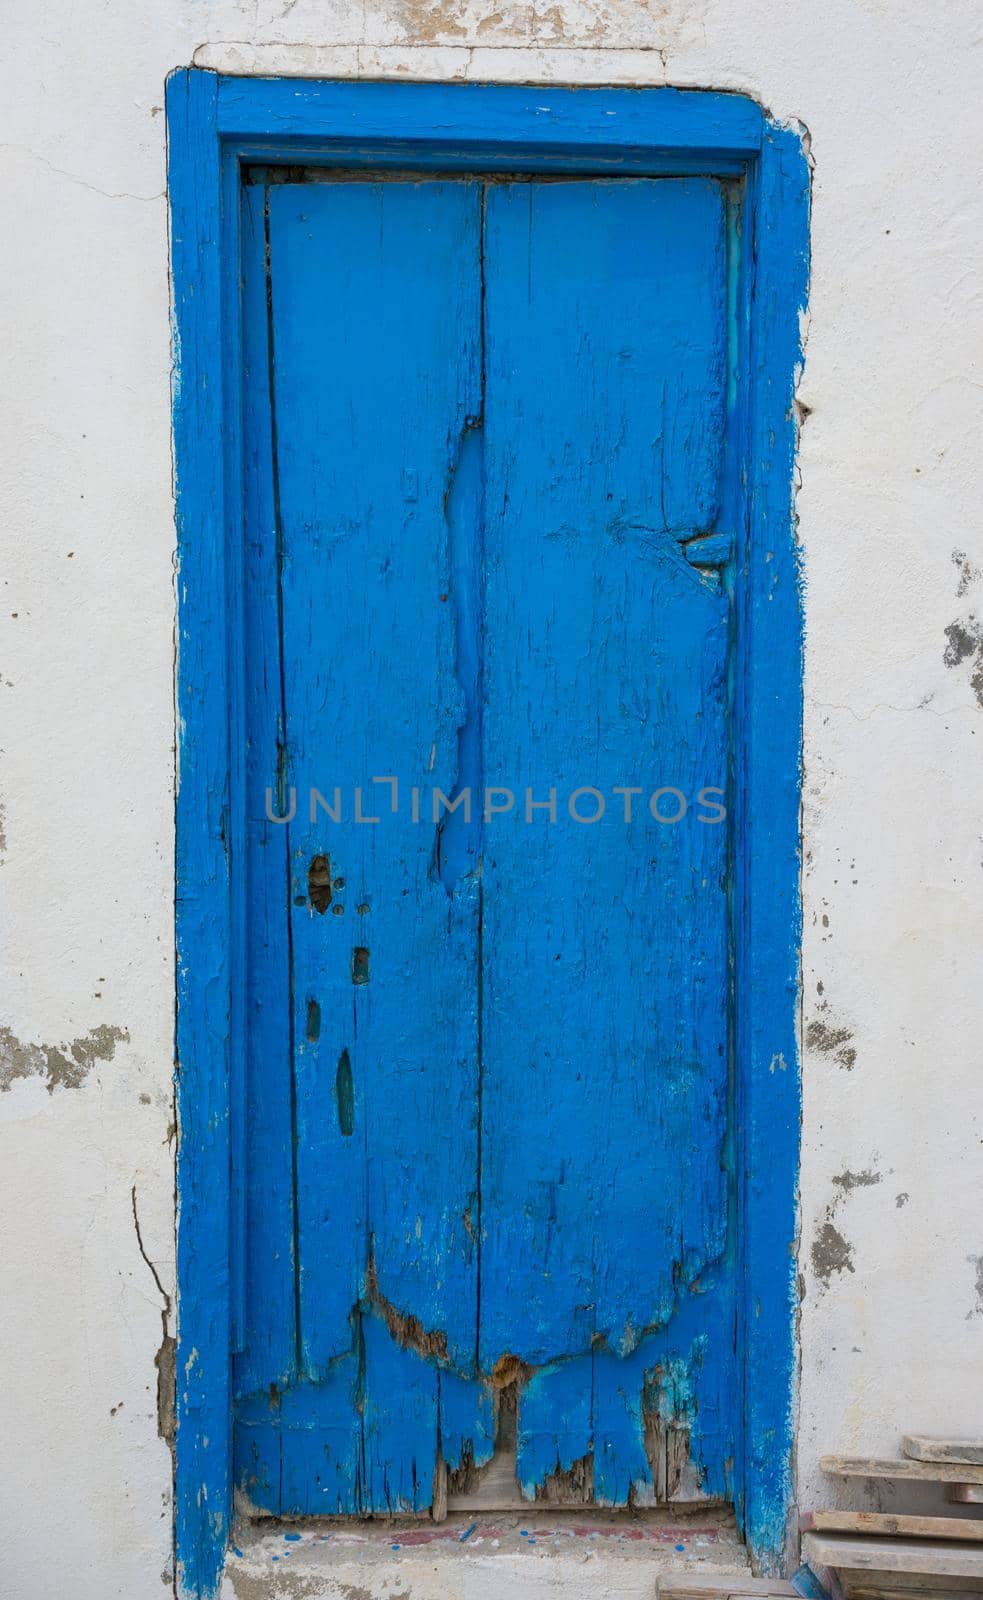 Blue aged door from Sidi Bou Said in Tunisia by Arsgera